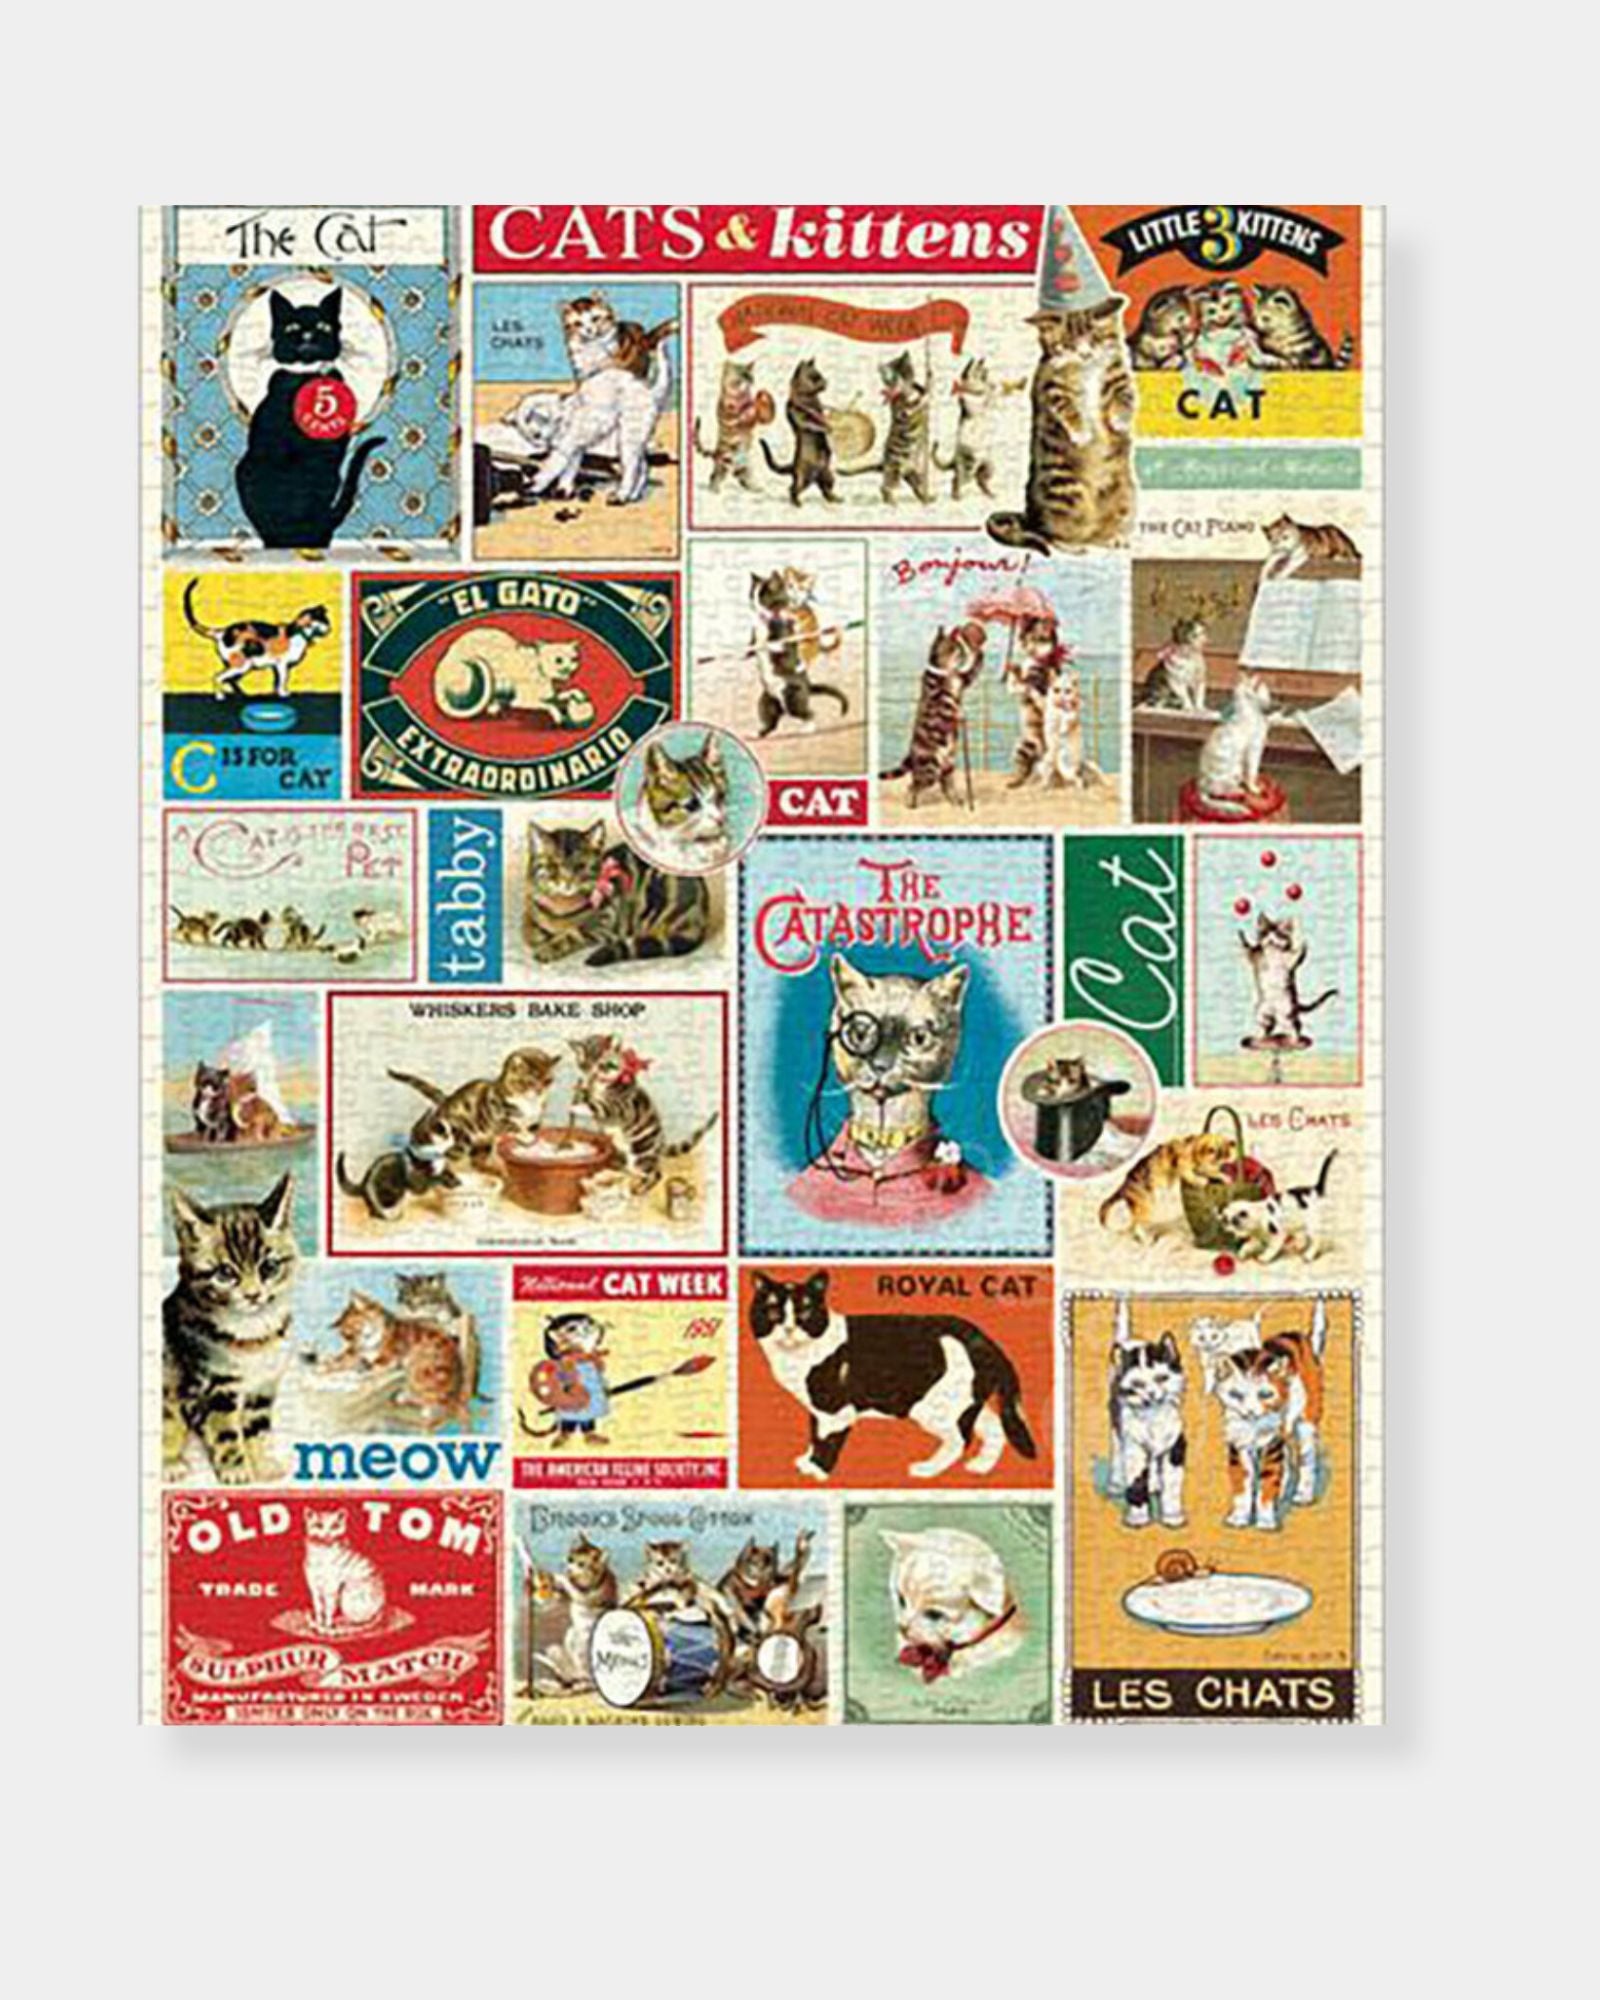 CATS & KITTENS - PUZZLE